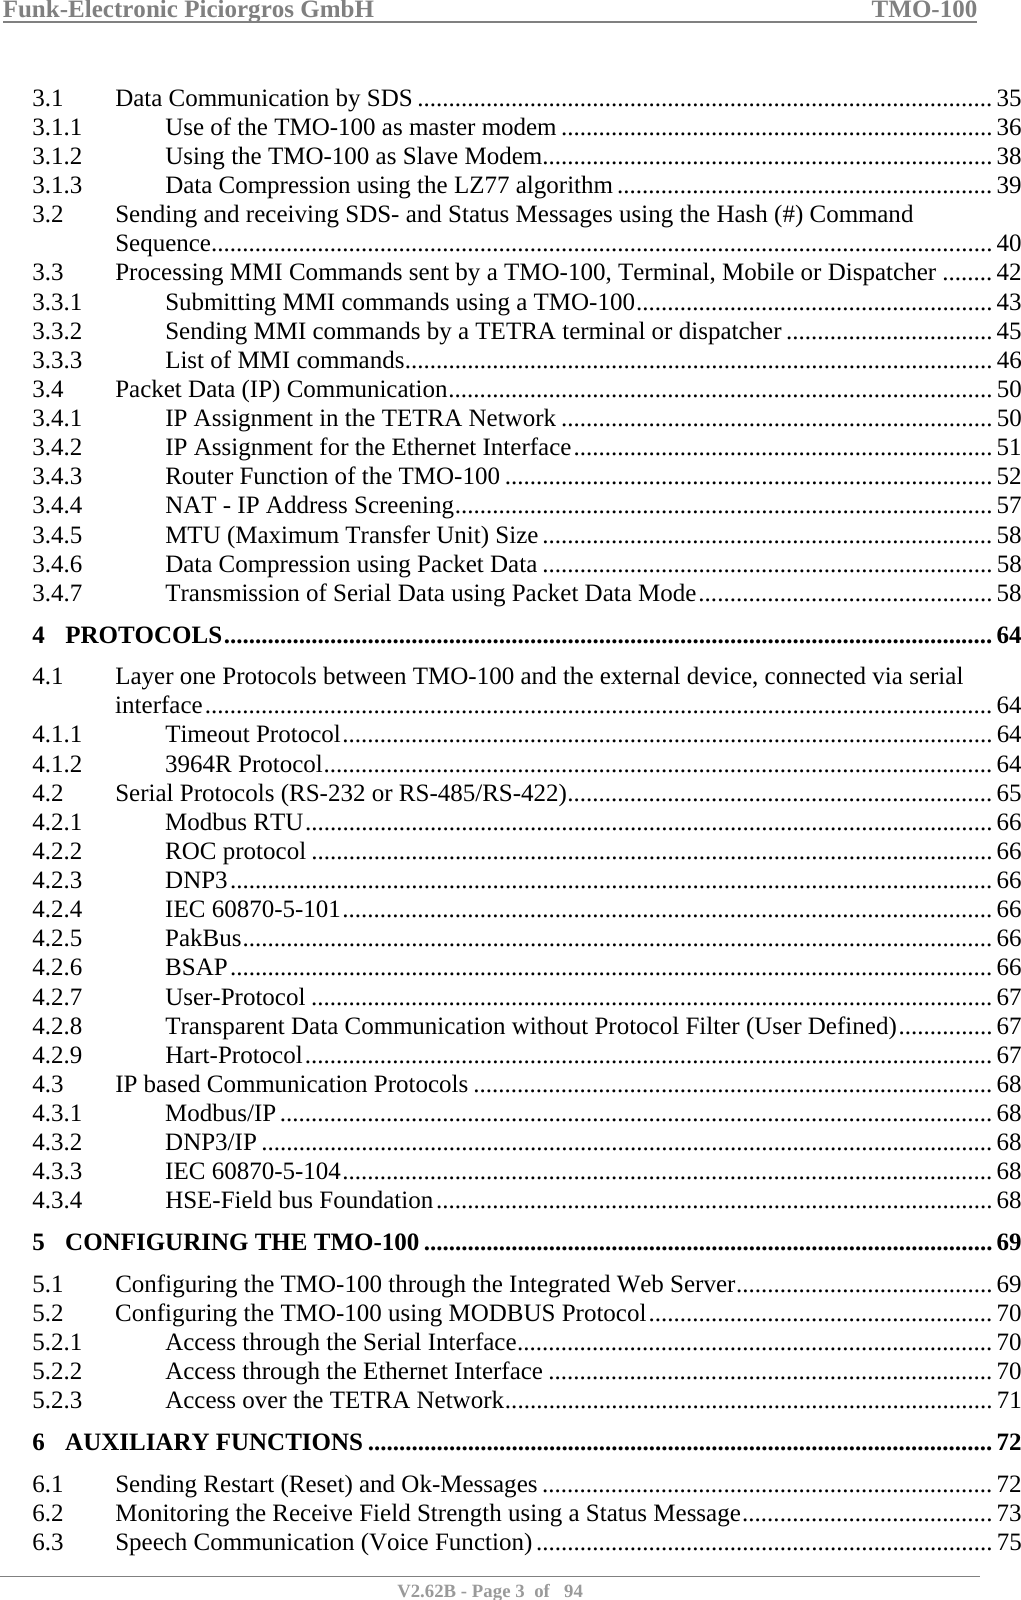 Funk-Electronic Piciorgros GmbH   TMO-100   V2.62B - Page 3  of   94   3.1  Data Communication by SDS ............................................................................................ 35 3.1.1  Use of the TMO-100 as master modem ..................................................................... 36 3.1.2  Using the TMO-100 as Slave Modem........................................................................ 38 3.1.3  Data Compression using the LZ77 algorithm............................................................ 39 3.2  Sending and receiving SDS- and Status Messages using the Hash (#) Command Sequence............................................................................................................................. 40 3.3  Processing MMI Commands sent by a TMO-100, Terminal, Mobile or Dispatcher ........ 42 3.3.1  Submitting MMI commands using a TMO-100......................................................... 43 3.3.2  Sending MMI commands by a TETRA terminal or dispatcher ................................. 45 3.3.3  List of MMI commands.............................................................................................. 46 3.4  Packet Data (IP) Communication....................................................................................... 50 3.4.1  IP Assignment in the TETRA Network ..................................................................... 50 3.4.2  IP Assignment for the Ethernet Interface................................................................... 51 3.4.3  Router Function of the TMO-100 .............................................................................. 52 3.4.4  NAT - IP Address Screening...................................................................................... 57 3.4.5  MTU (Maximum Transfer Unit) Size........................................................................58 3.4.6  Data Compression using Packet Data ........................................................................ 58 3.4.7  Transmission of Serial Data using Packet Data Mode............................................... 58 4 PROTOCOLS........................................................................................................................... 64 4.1  Layer one Protocols between TMO-100 and the external device, connected via serial interface..............................................................................................................................64 4.1.1 Timeout Protocol........................................................................................................ 64 4.1.2 3964R Protocol........................................................................................................... 64 4.2  Serial Protocols (RS-232 or RS-485/RS-422)....................................................................65 4.2.1 Modbus RTU.............................................................................................................. 66 4.2.2 ROC protocol ............................................................................................................. 66 4.2.3 DNP3..........................................................................................................................66 4.2.4 IEC 60870-5-101........................................................................................................ 66 4.2.5 PakBus........................................................................................................................ 66 4.2.6 BSAP.......................................................................................................................... 66 4.2.7 User-Protocol .............................................................................................................67 4.2.8  Transparent Data Communication without Protocol Filter (User Defined)...............67 4.2.9 Hart-Protocol..............................................................................................................67 4.3  IP based Communication Protocols ................................................................................... 68 4.3.1 Modbus/IP.................................................................................................................. 68 4.3.2 DNP3/IP ..................................................................................................................... 68 4.3.3 IEC 60870-5-104........................................................................................................ 68 4.3.4  HSE-Field bus Foundation......................................................................................... 68 5 CONFIGURING THE TMO-100 ........................................................................................... 69 5.1  Configuring the TMO-100 through the Integrated Web Server......................................... 69 5.2  Configuring the TMO-100 using MODBUS Protocol.......................................................70 5.2.1  Access through the Serial Interface............................................................................ 70 5.2.2  Access through the Ethernet Interface ....................................................................... 70 5.2.3  Access over the TETRA Network.............................................................................. 71 6 AUXILIARY FUNCTIONS .................................................................................................... 72 6.1  Sending Restart (Reset) and Ok-Messages ........................................................................ 72 6.2  Monitoring the Receive Field Strength using a Status Message........................................ 73 6.3  Speech Communication (Voice Function).........................................................................75 